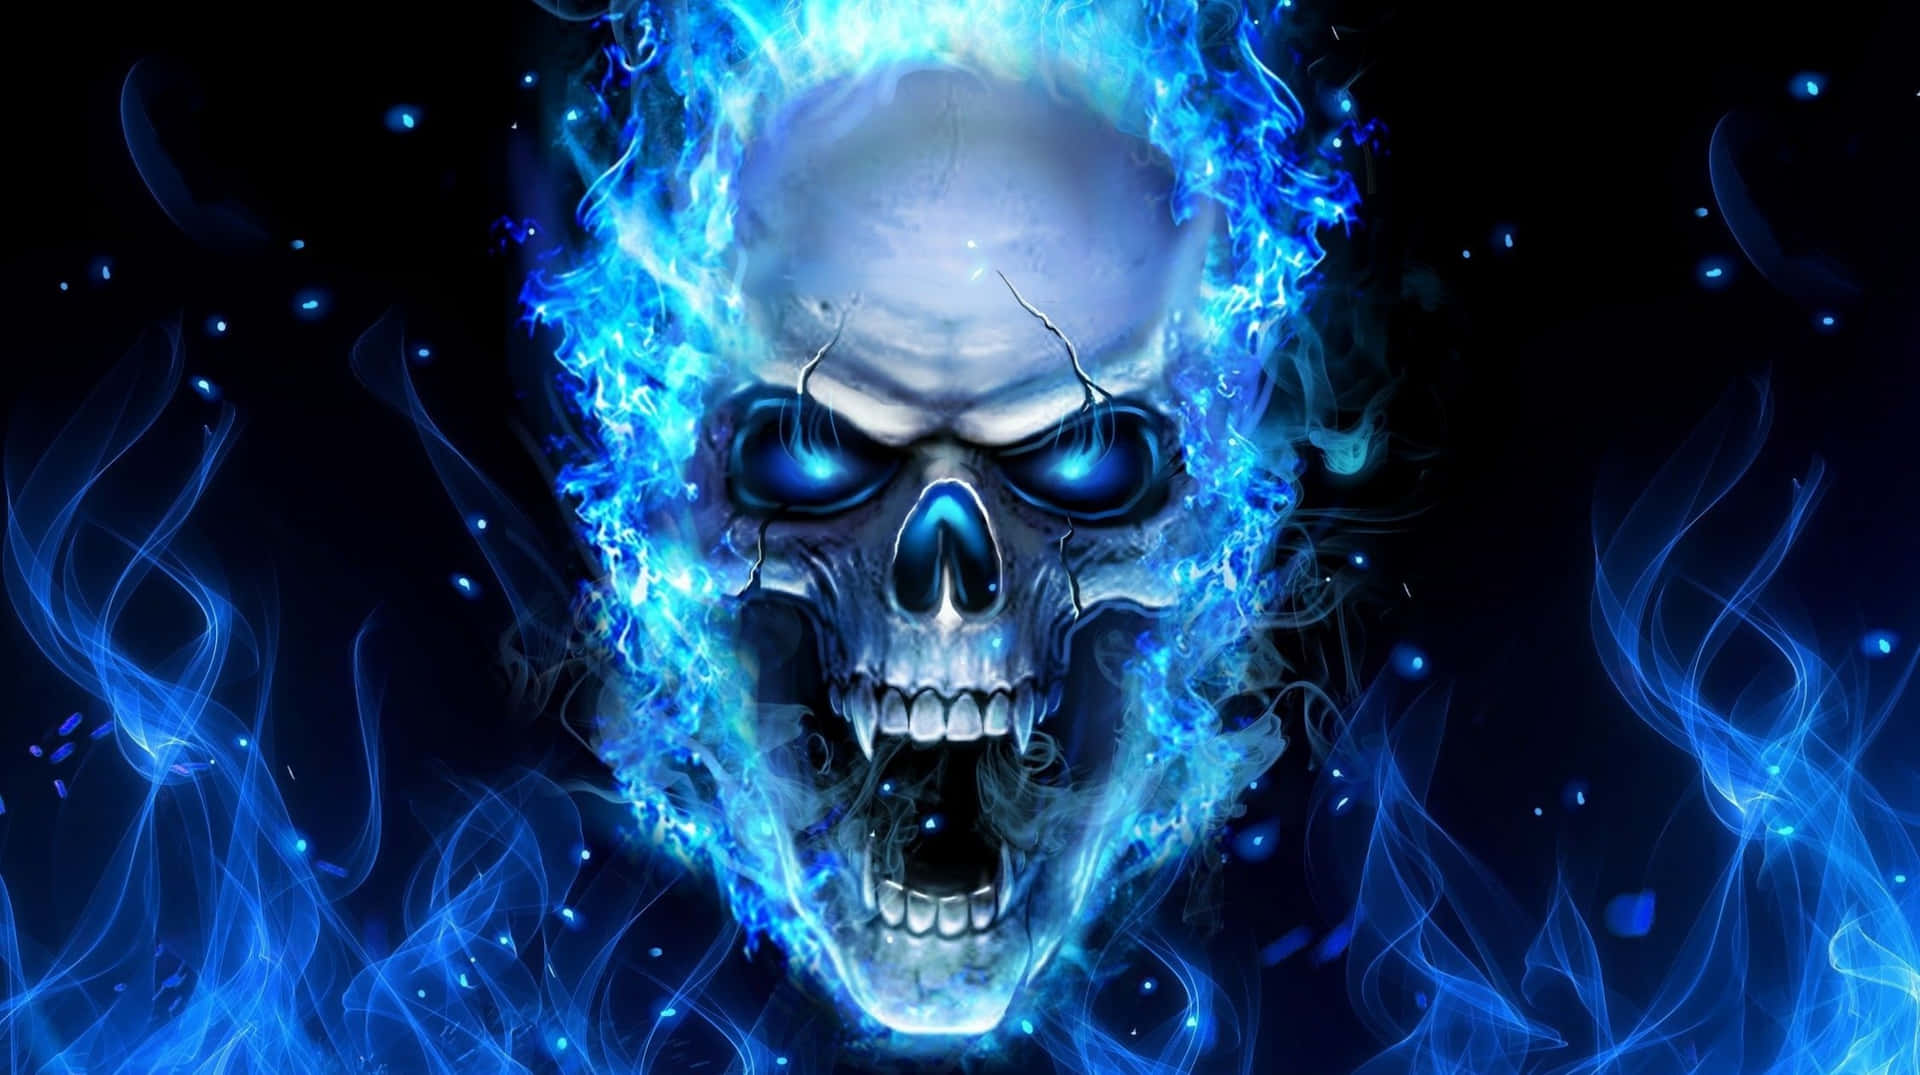 Skull Wallpaper Images  Free Photos PNG Stickers Wallpapers   Backgrounds  rawpixel